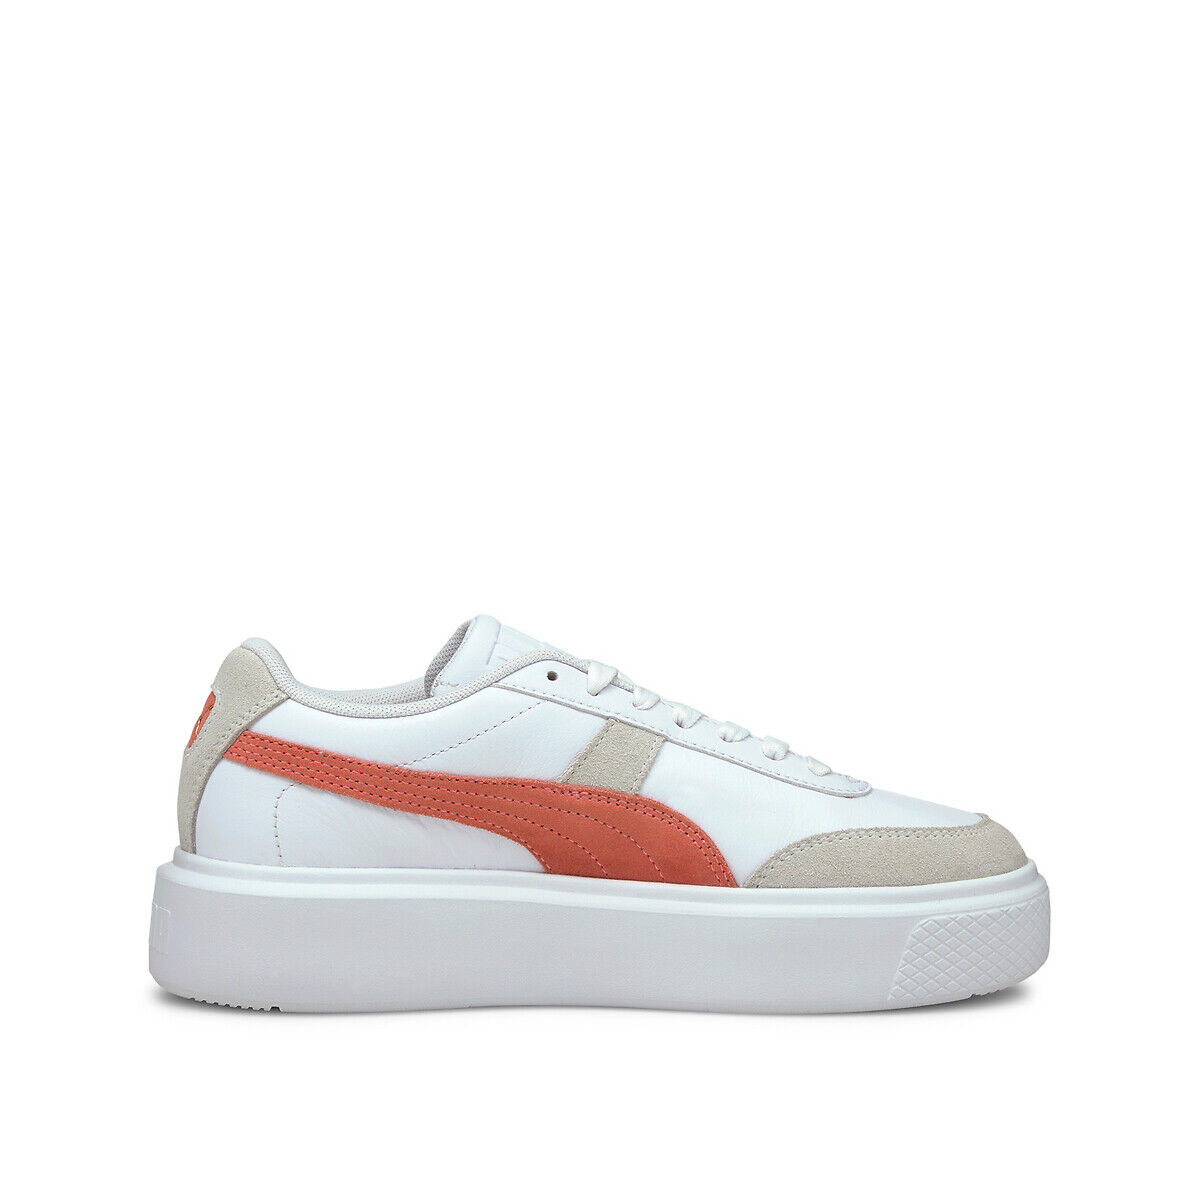 Puma Sneakers Oslo Archive WEISS